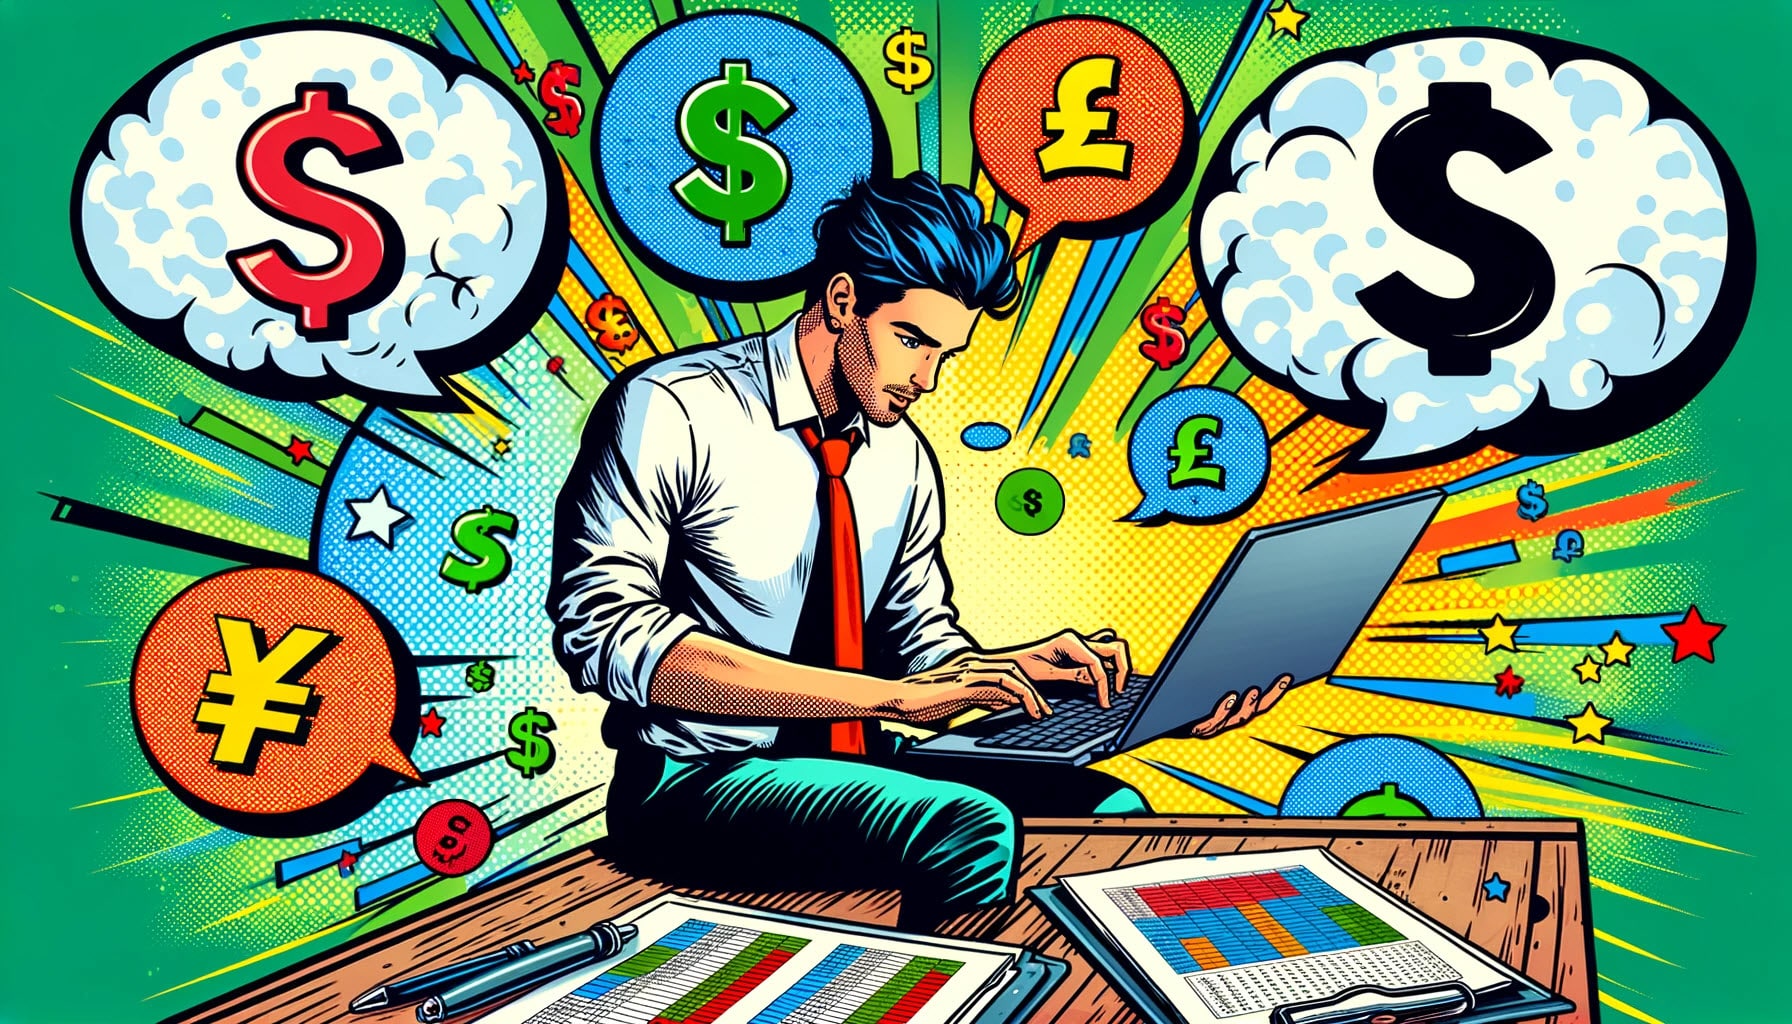 image features a casually dressed person in a business environment, applying formatting to an Excel workbook. The scene is surrounded by vibrant bubbles containing currency symbols like the dollar and pound, capturing the person's engagement in formatting tasks within Excel in a playful and energetic comic book style. This setting reflects a modern, less formal professional environment.